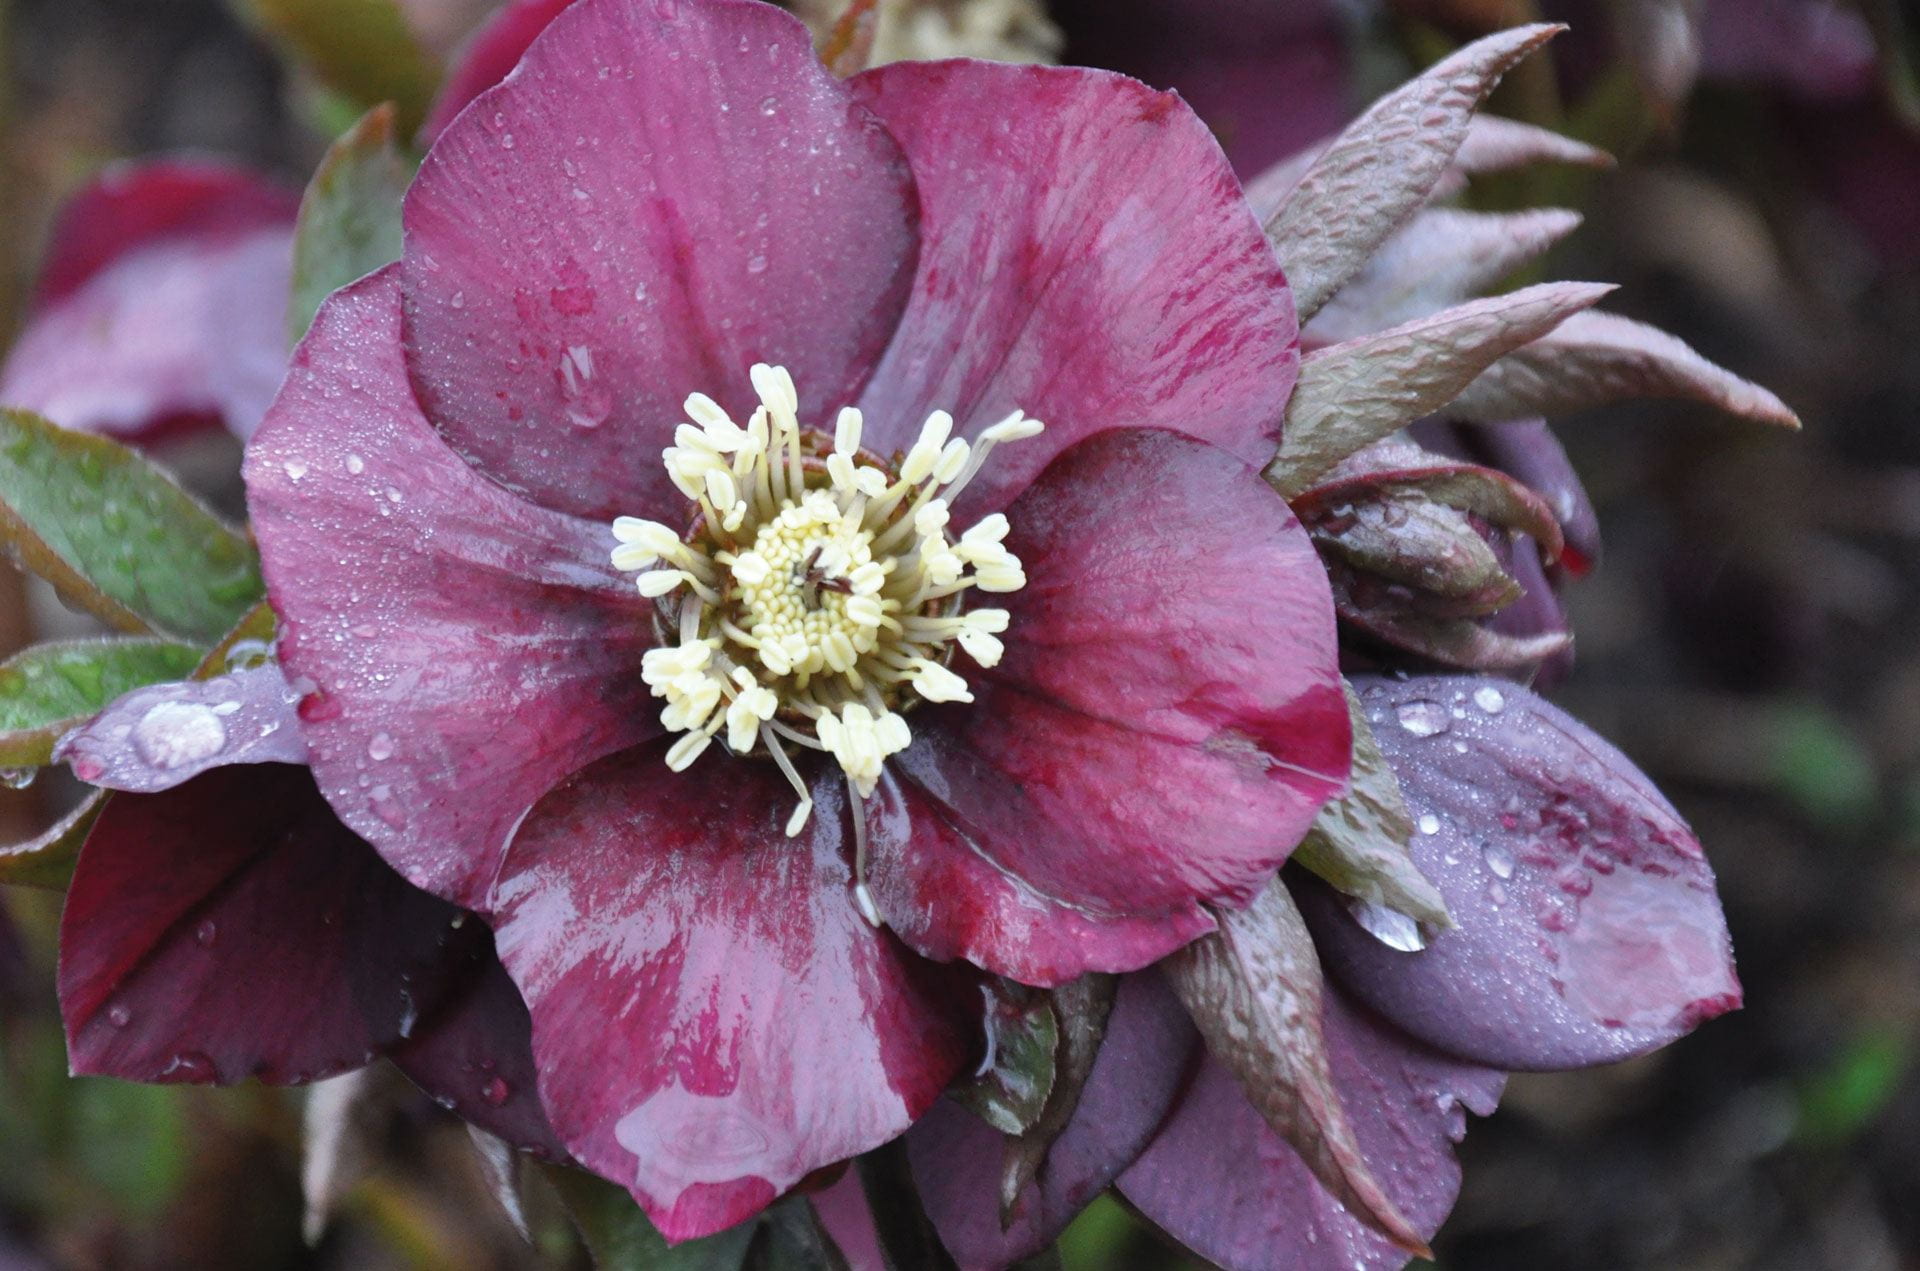 There are more than 663 individual specimens comprising more than 7 unique species, hybrids, and cultivars currently growing in the Arboretum. The majority of the hellebore collection can be found around the Overlook Pavilion, Event Lawn, and in the Rose and Fragrance Garden.